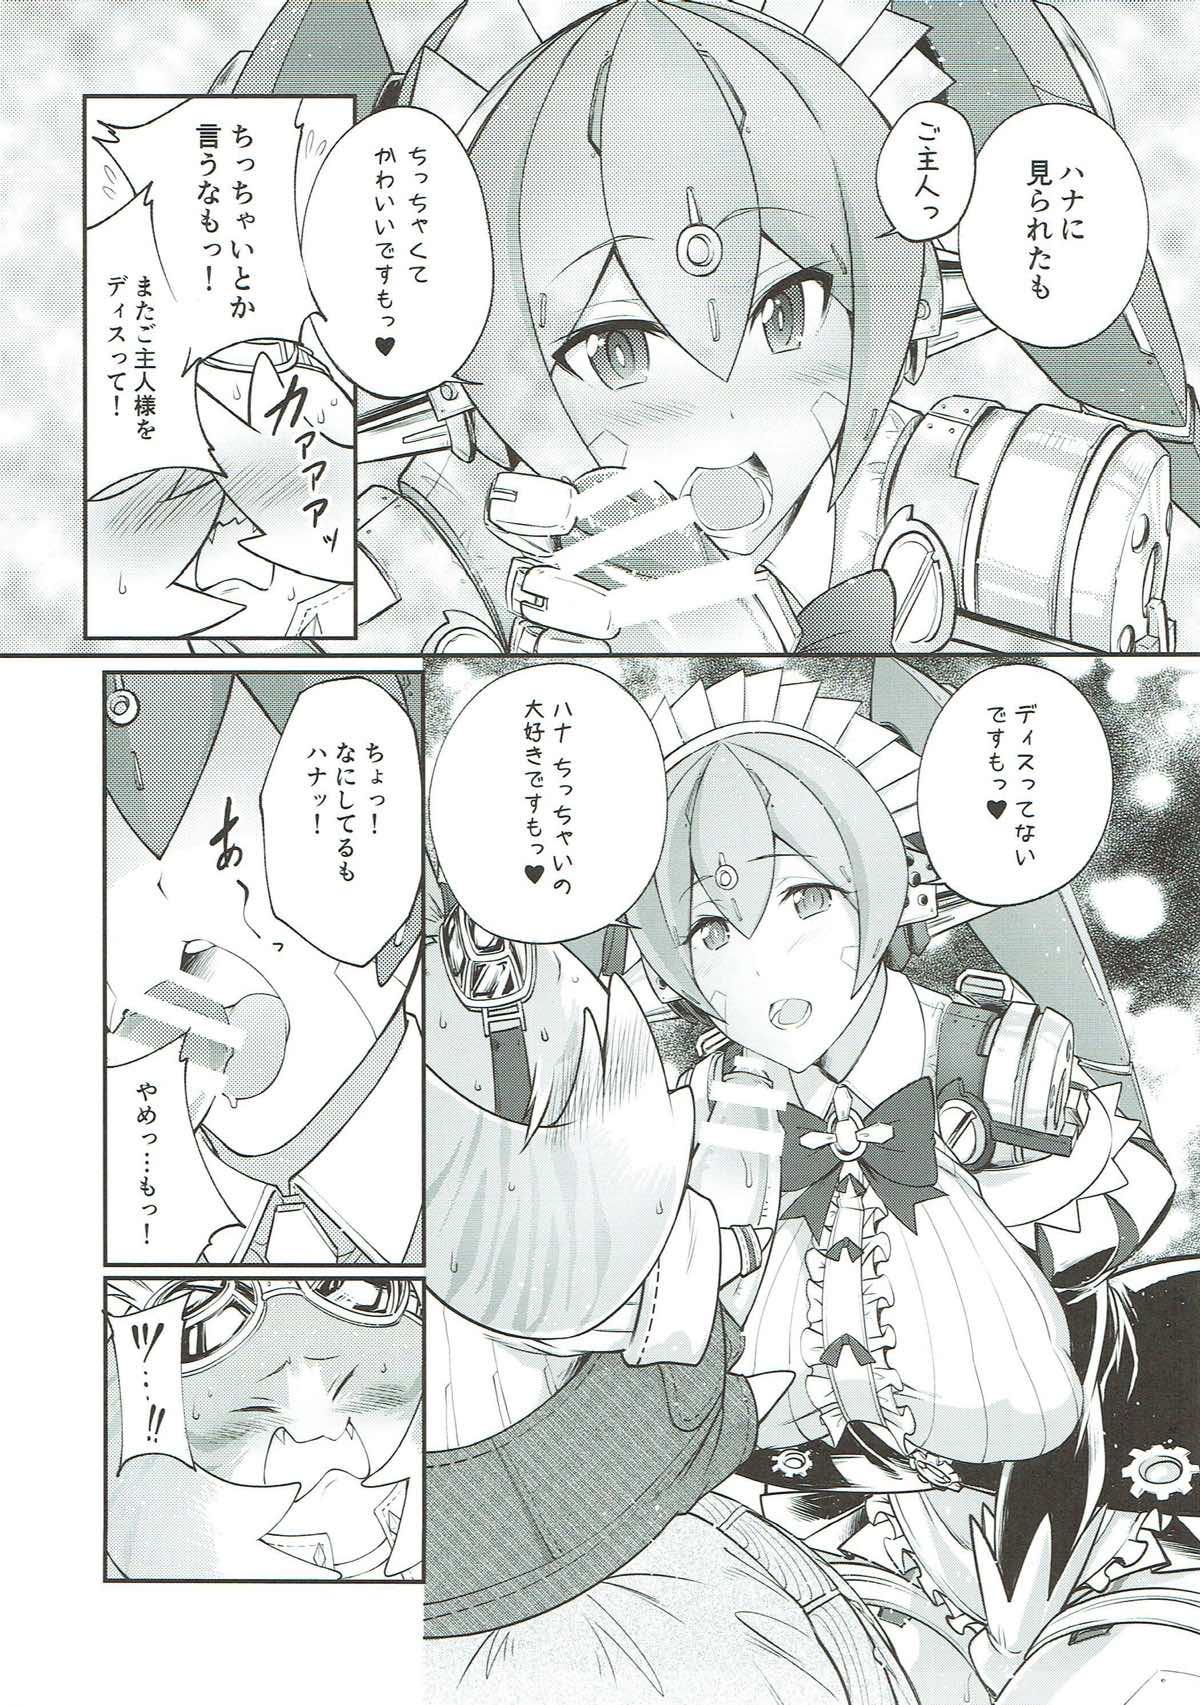 Punish Tiger x Flower - Xenoblade chronicles 2 Amateur Porno - Page 6